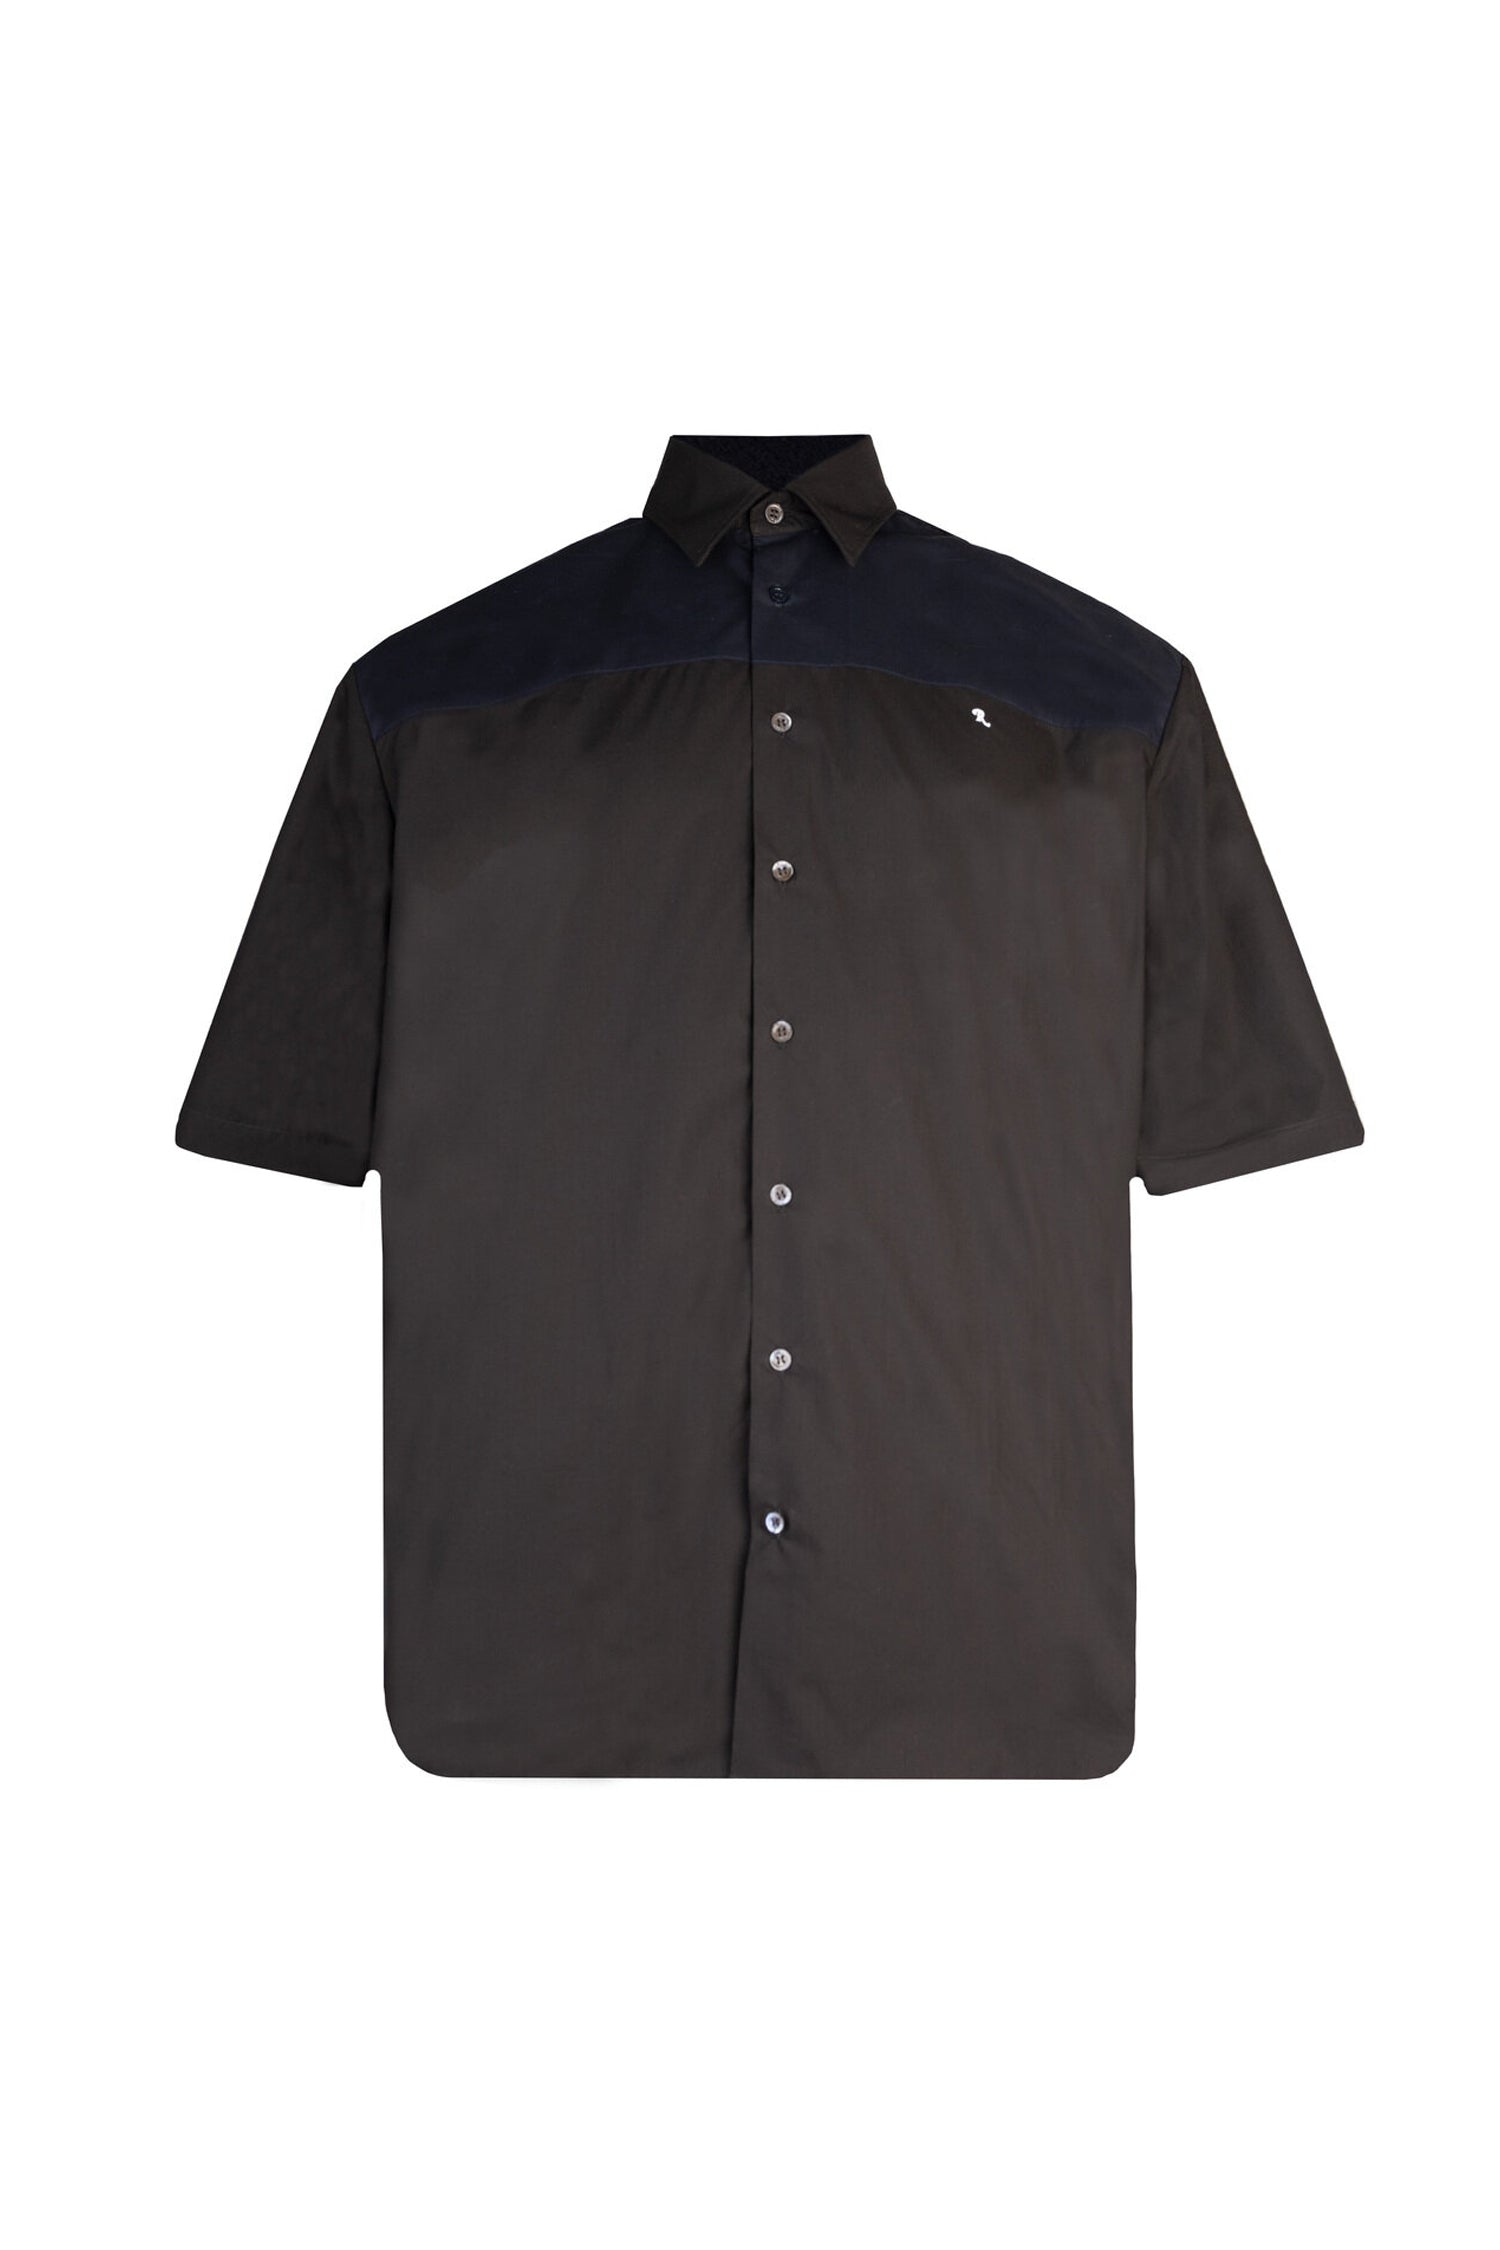 AMERICANO BICOLOR SHIRT WITH EMBROIDERY IN BLACK/NIGHT, FW22